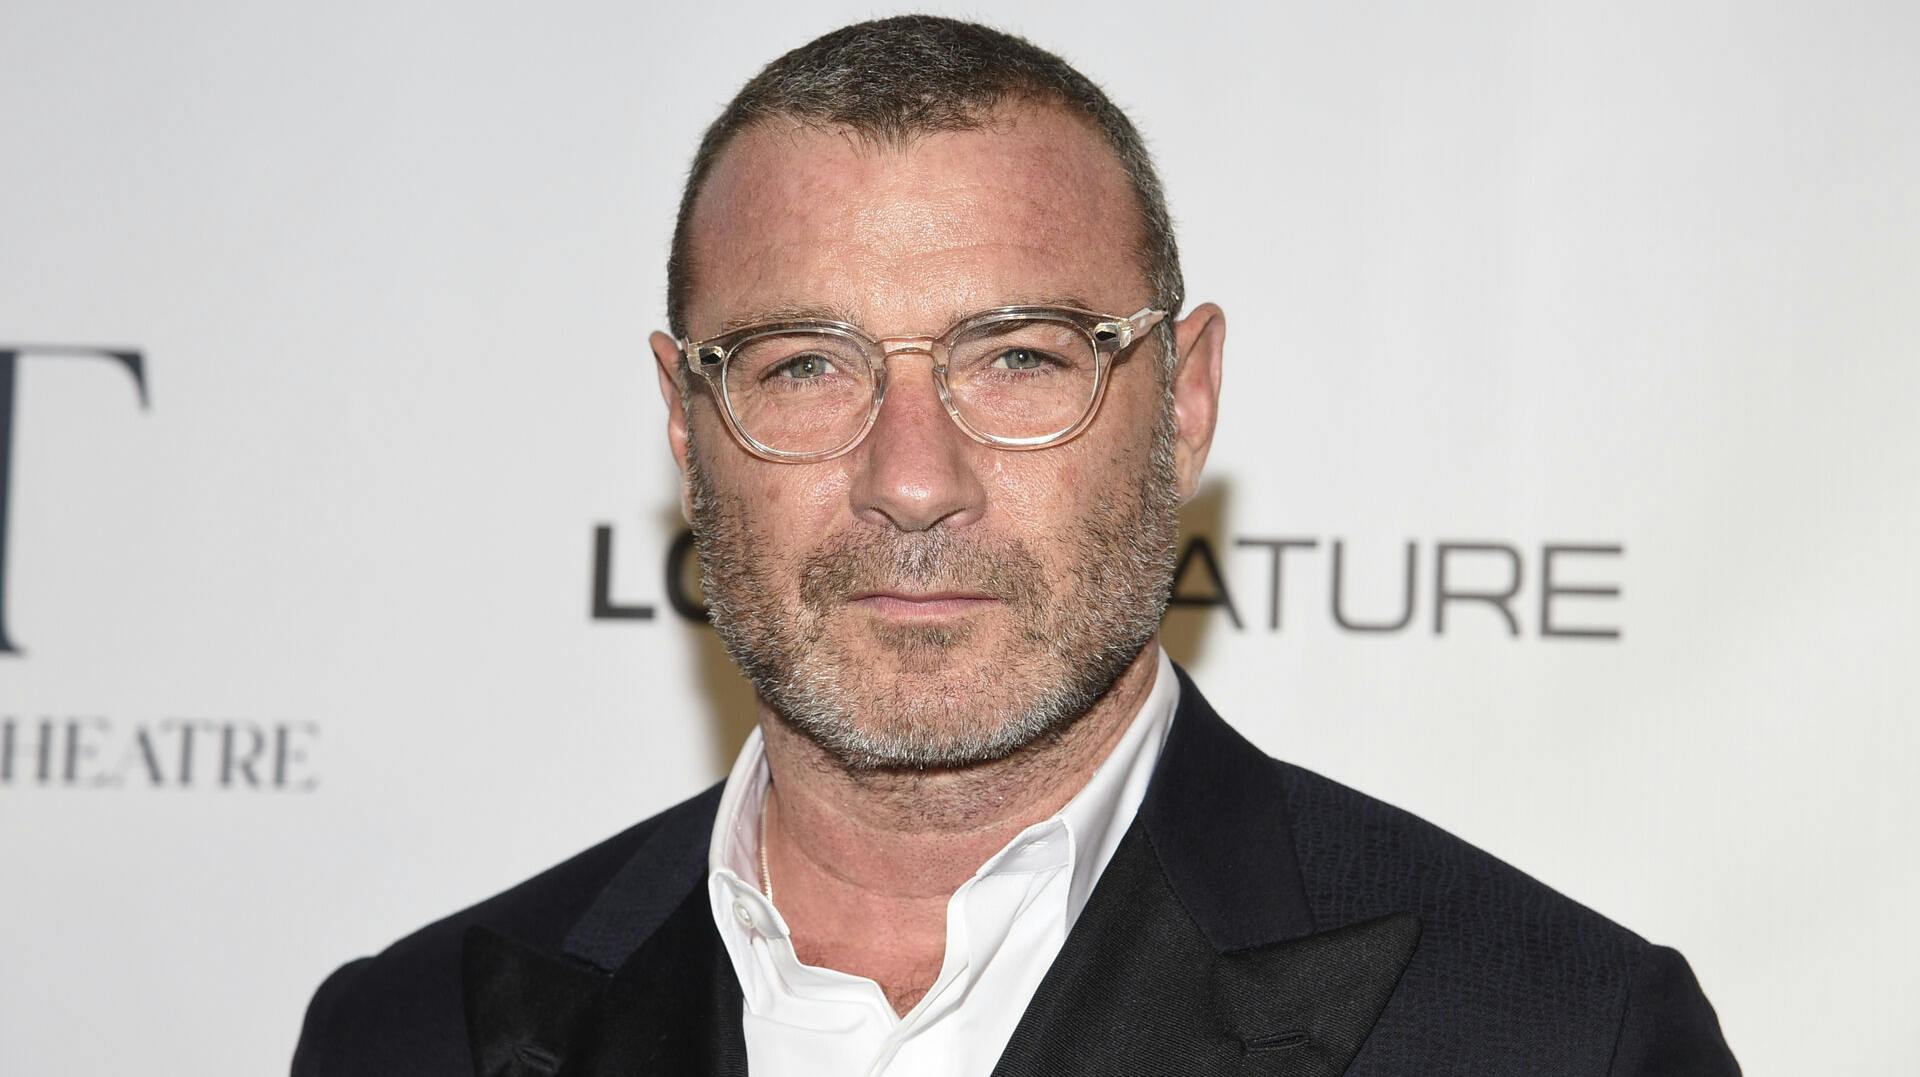 Liev Schreiber attends the American Ballet Theatre's Fall Gala at the David H. Koch Theater on Tuesday, Oct. 26, 2021, in New York. (Photo by Evan Agostini/Invision/AP)